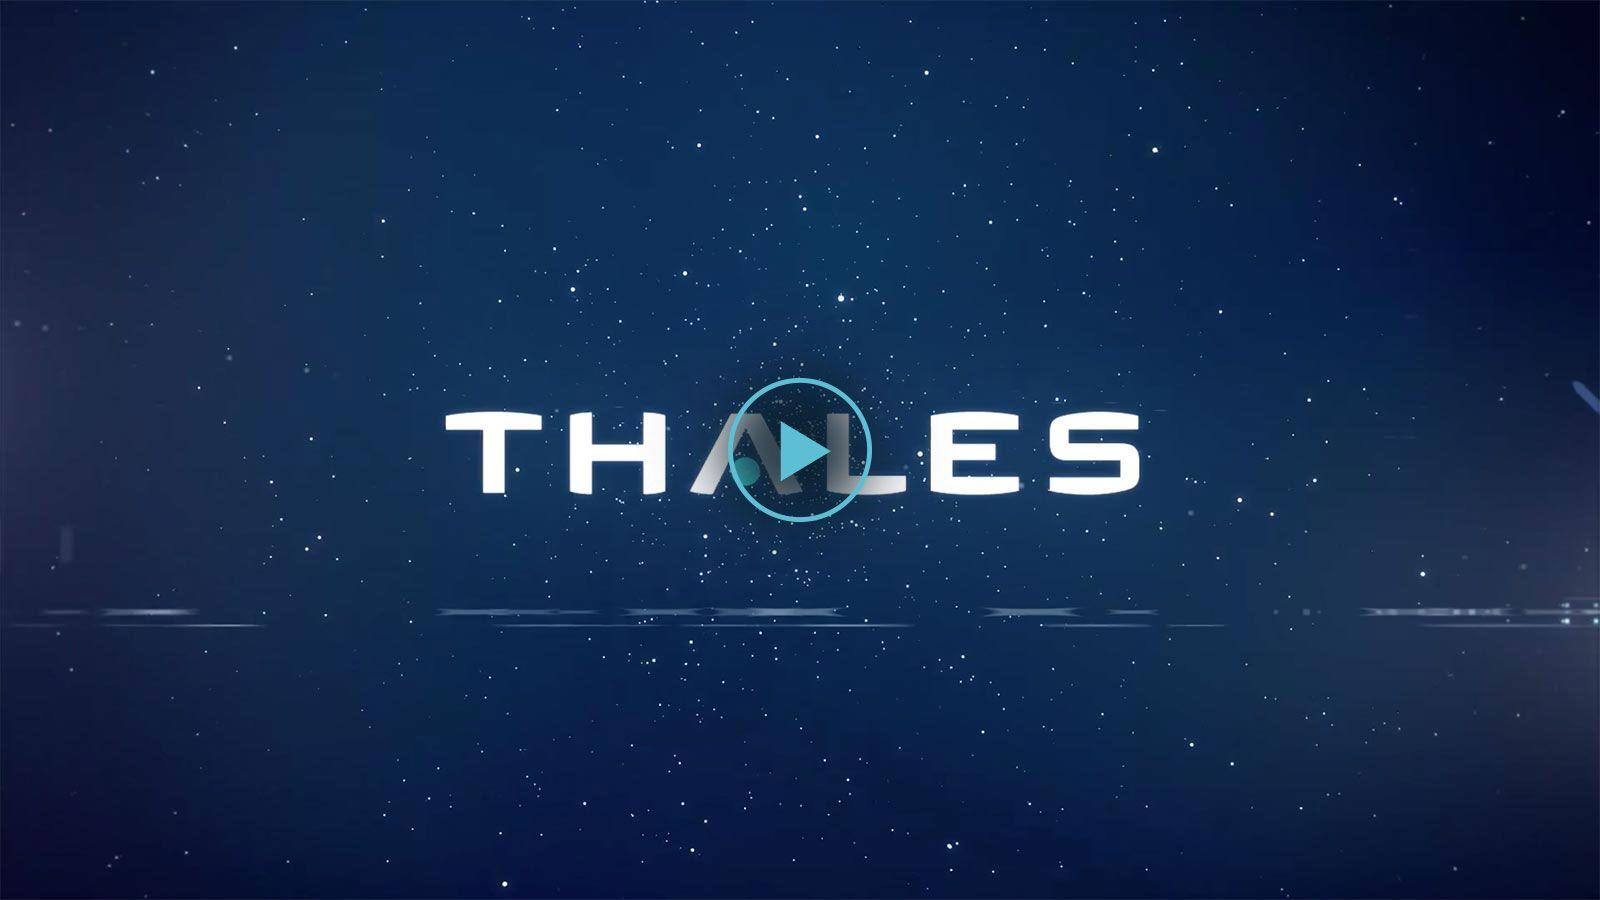 Thales Logo - Jobs at Thales Group | Careers in Engineering and Technology